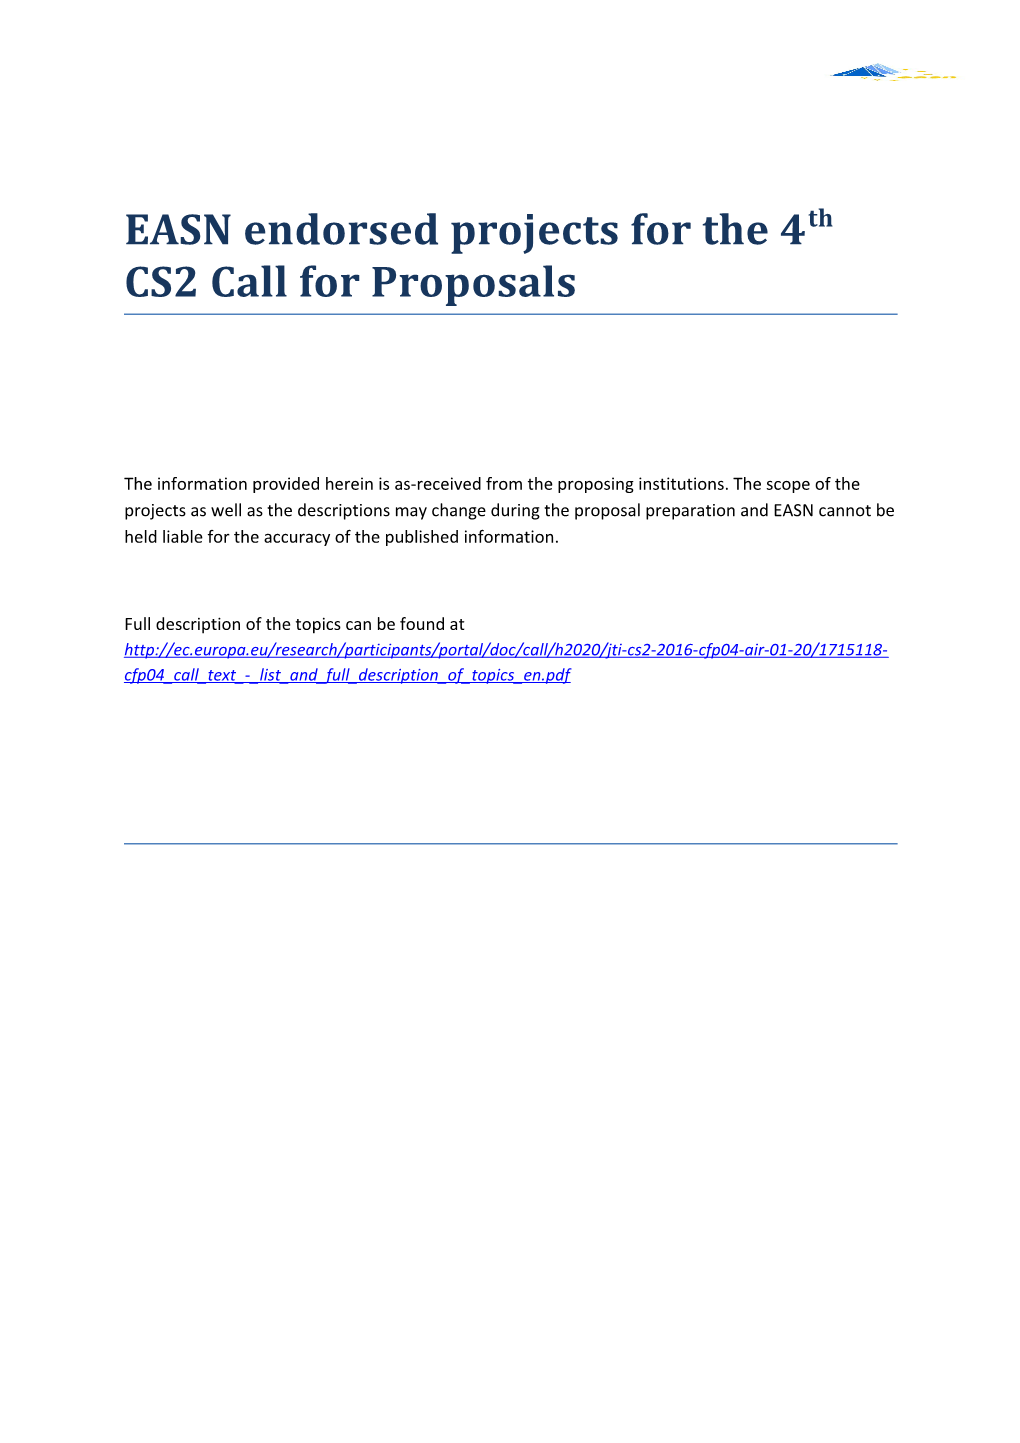 EASN Endorsed Projects for the 4Th CS2 Call for Proposals